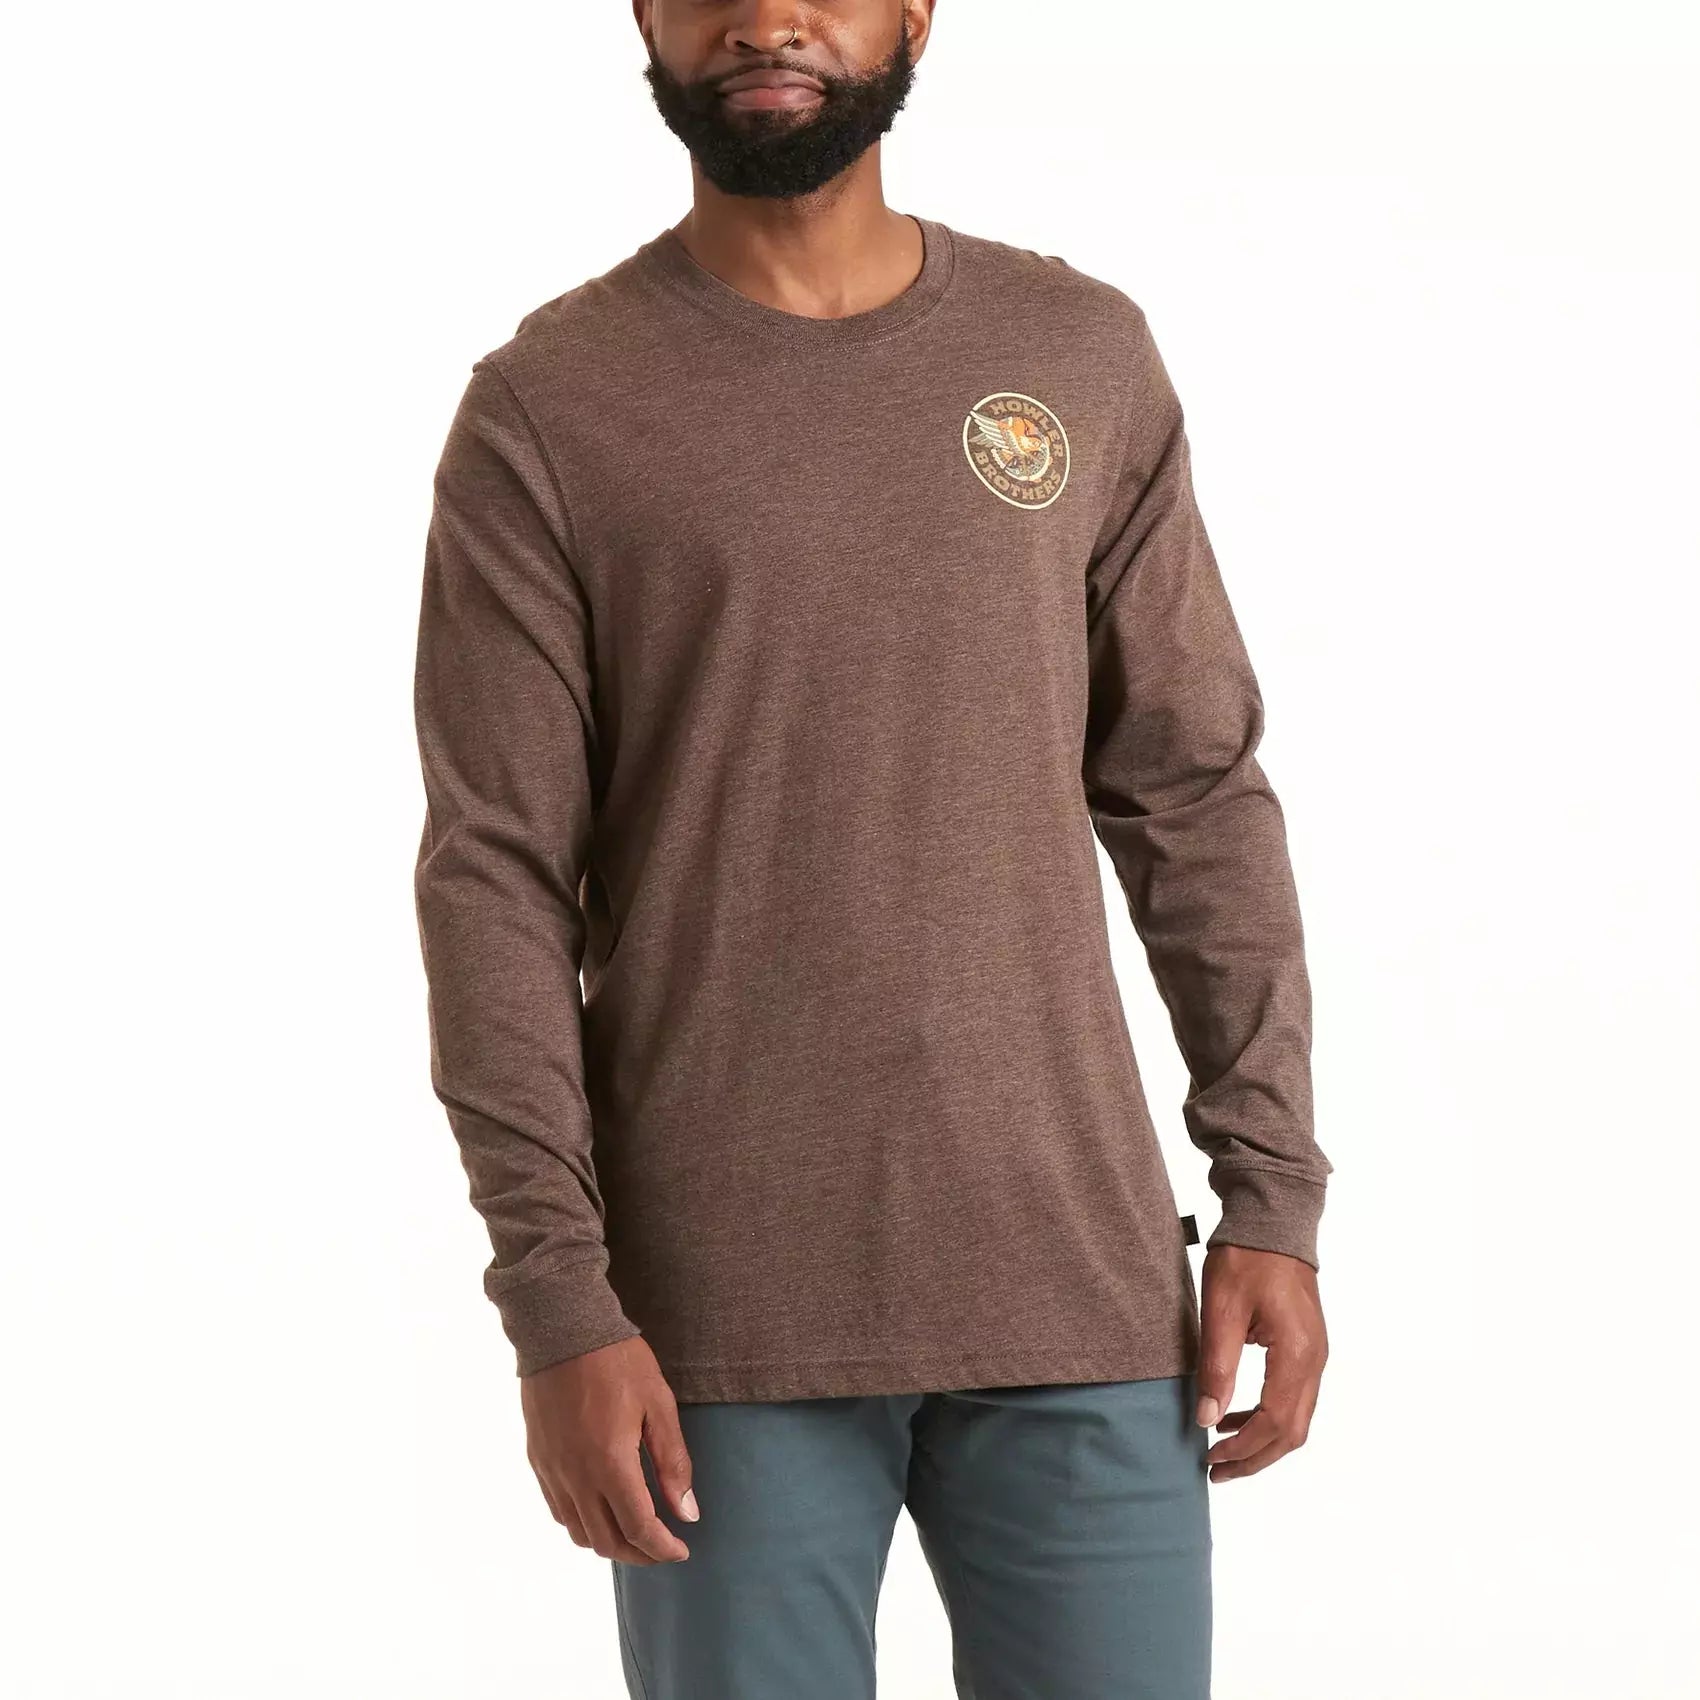 Howler Bros Select Longsleeve T - Osprey and Pike : Espresso Heather